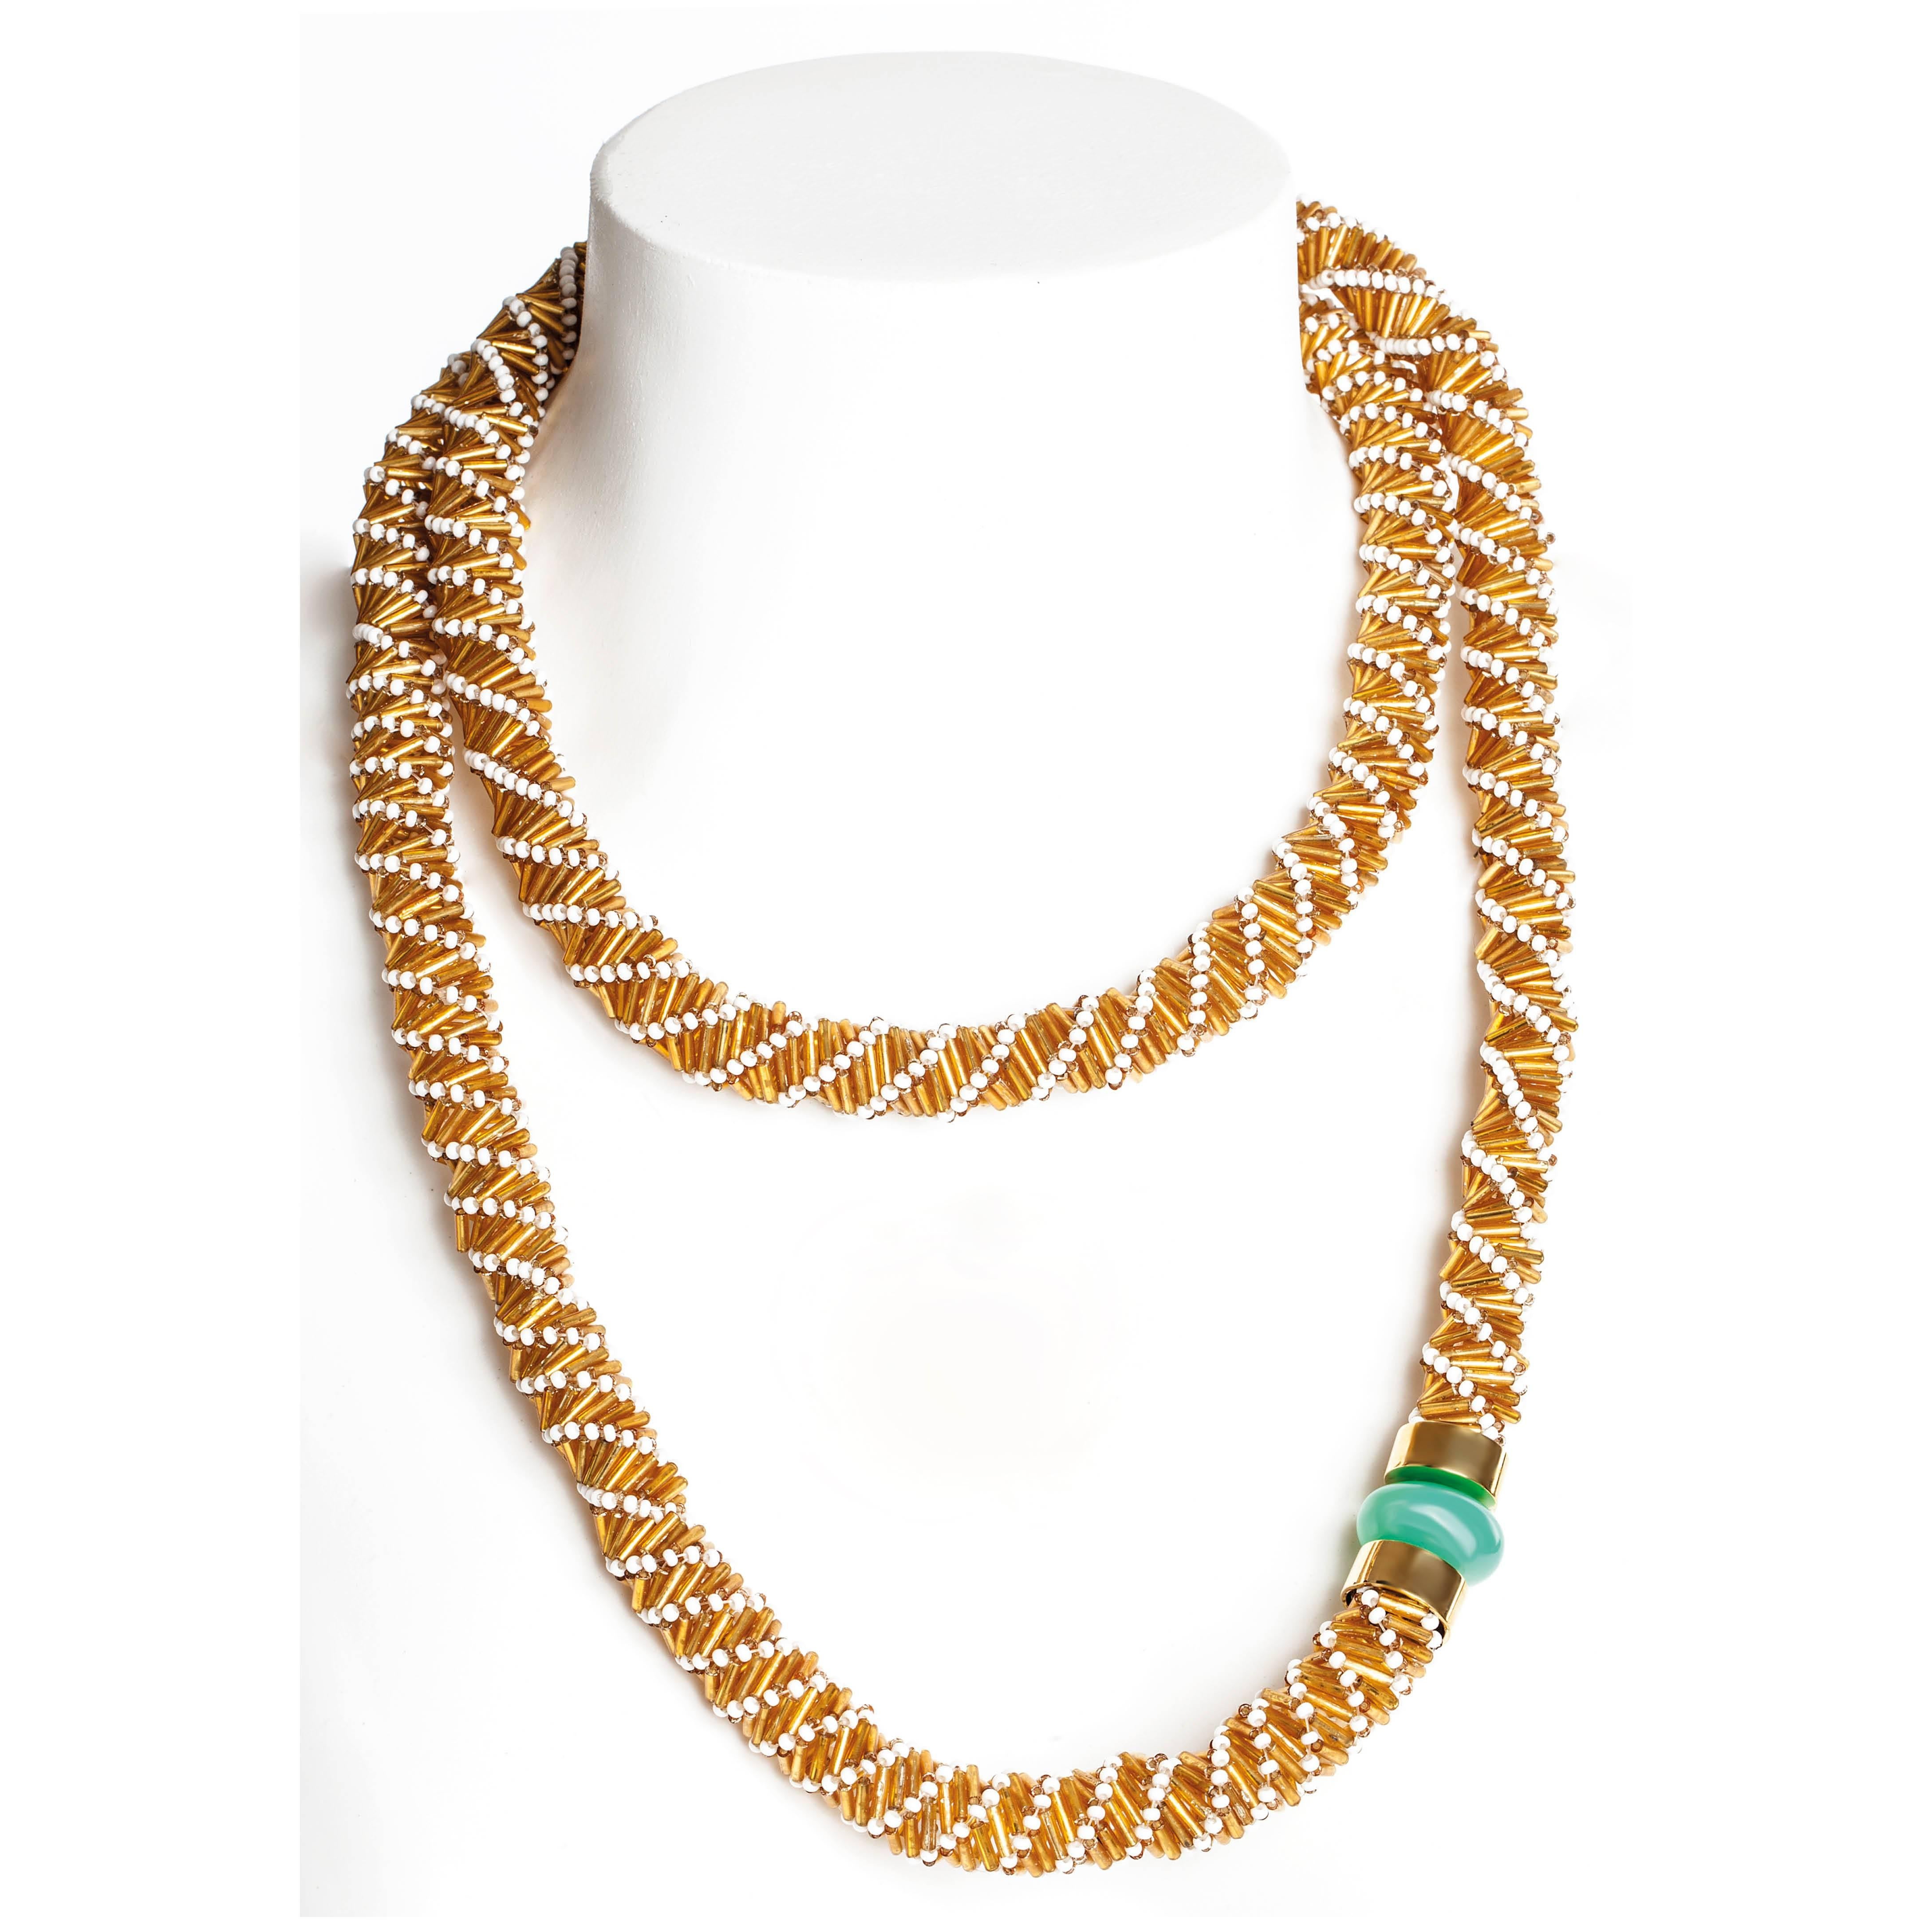 This statement necklace is beaded by hand by Maasai women in Kenya and finished to the finest quality in London with a large chrysoprase stone bead.

The necklace is created as part of a fair-trade partnership with skilled bead makers in rural